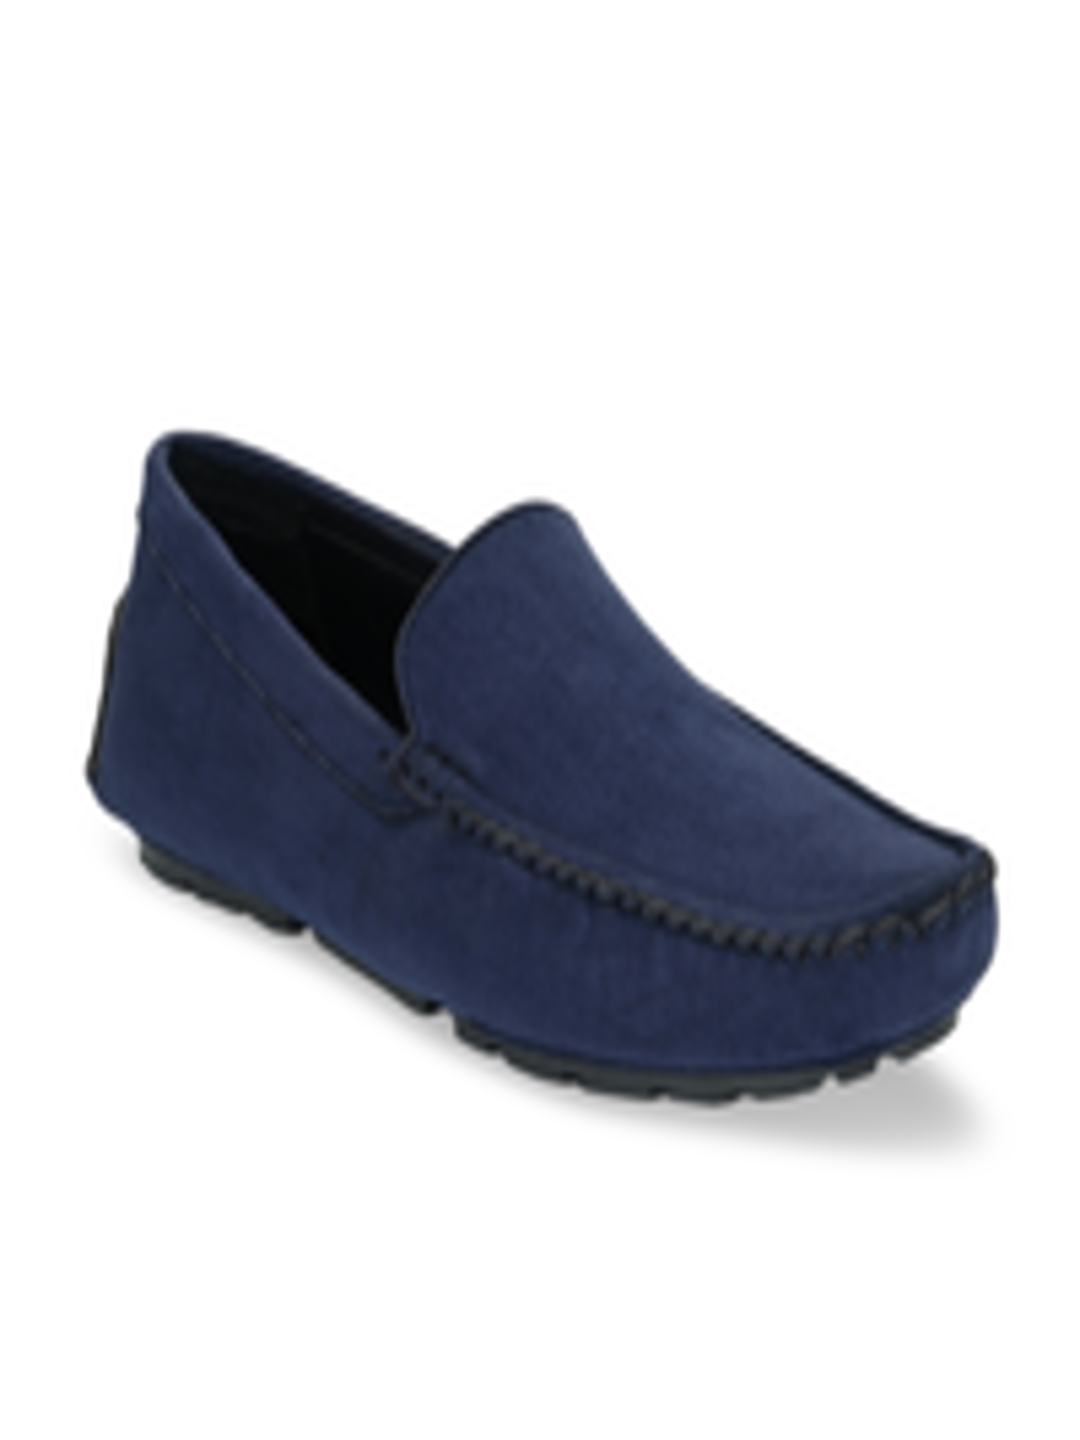 Buy Ferraiolo Men Navy Blue Suede Loafers - Casual Shoes for Men ...